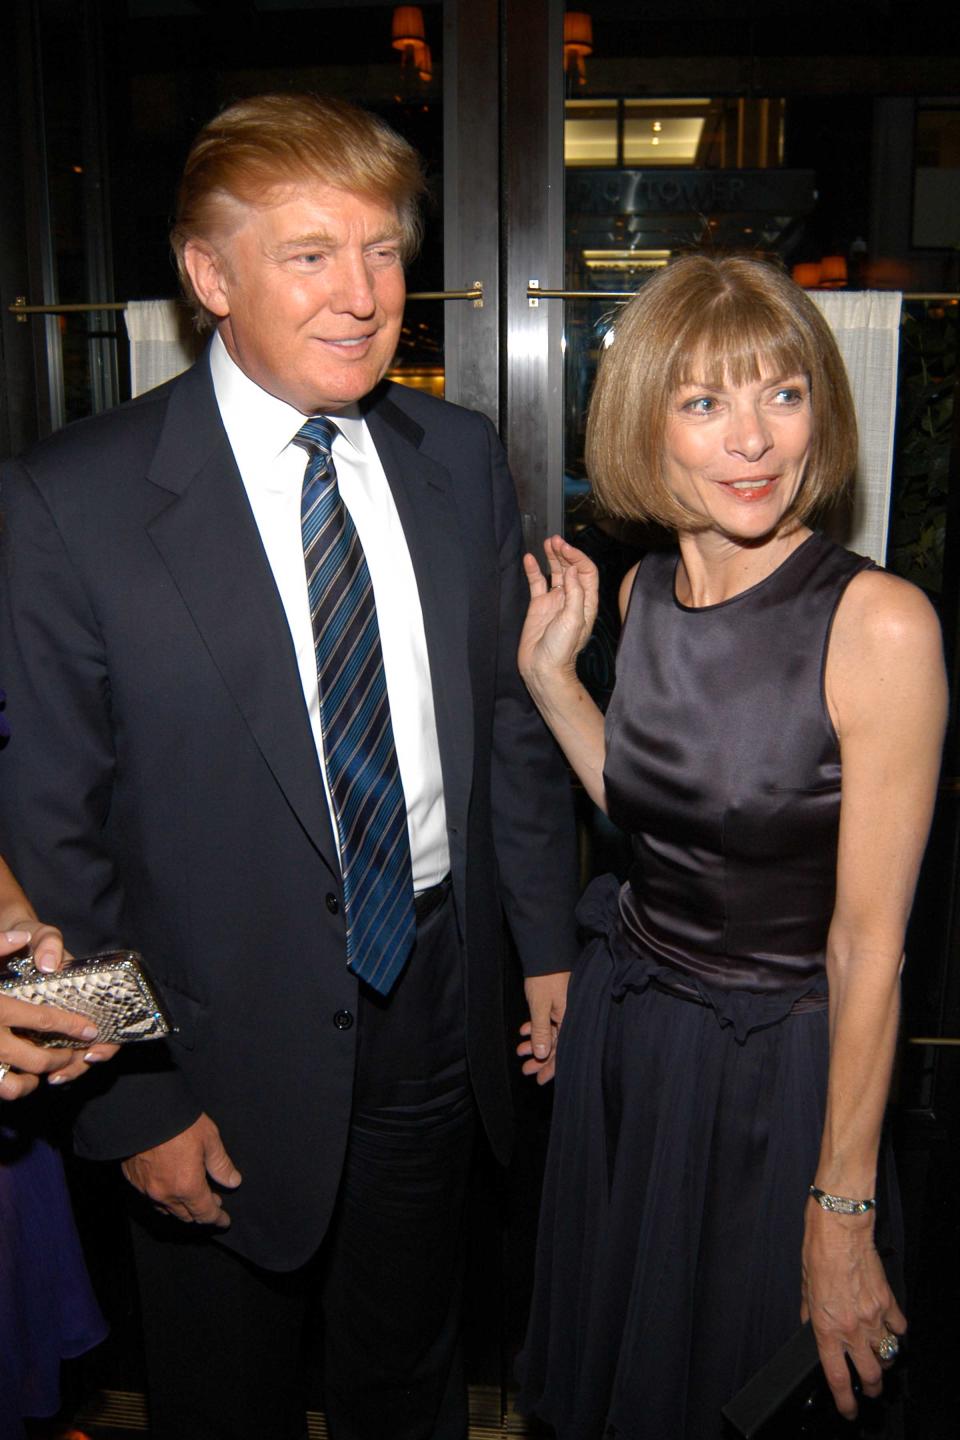 Donald Trump and Anna Wintour in 2005. (Photo: Patrick McMullan/Getty Images)